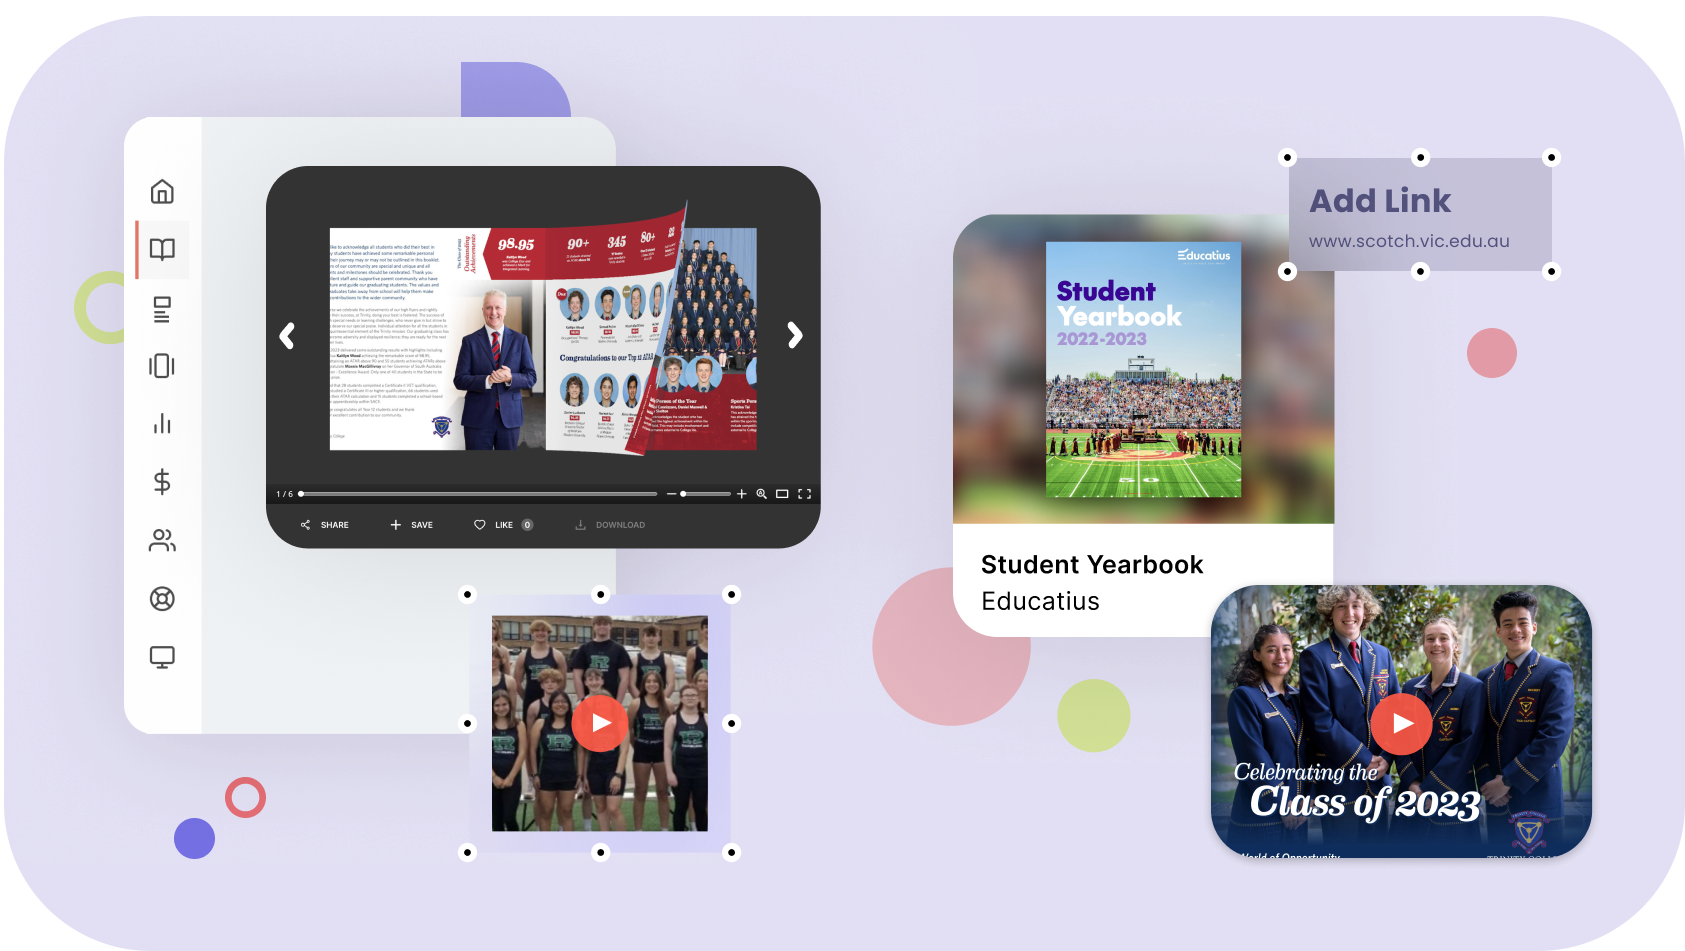 Learn what to include in a digital yearbook.